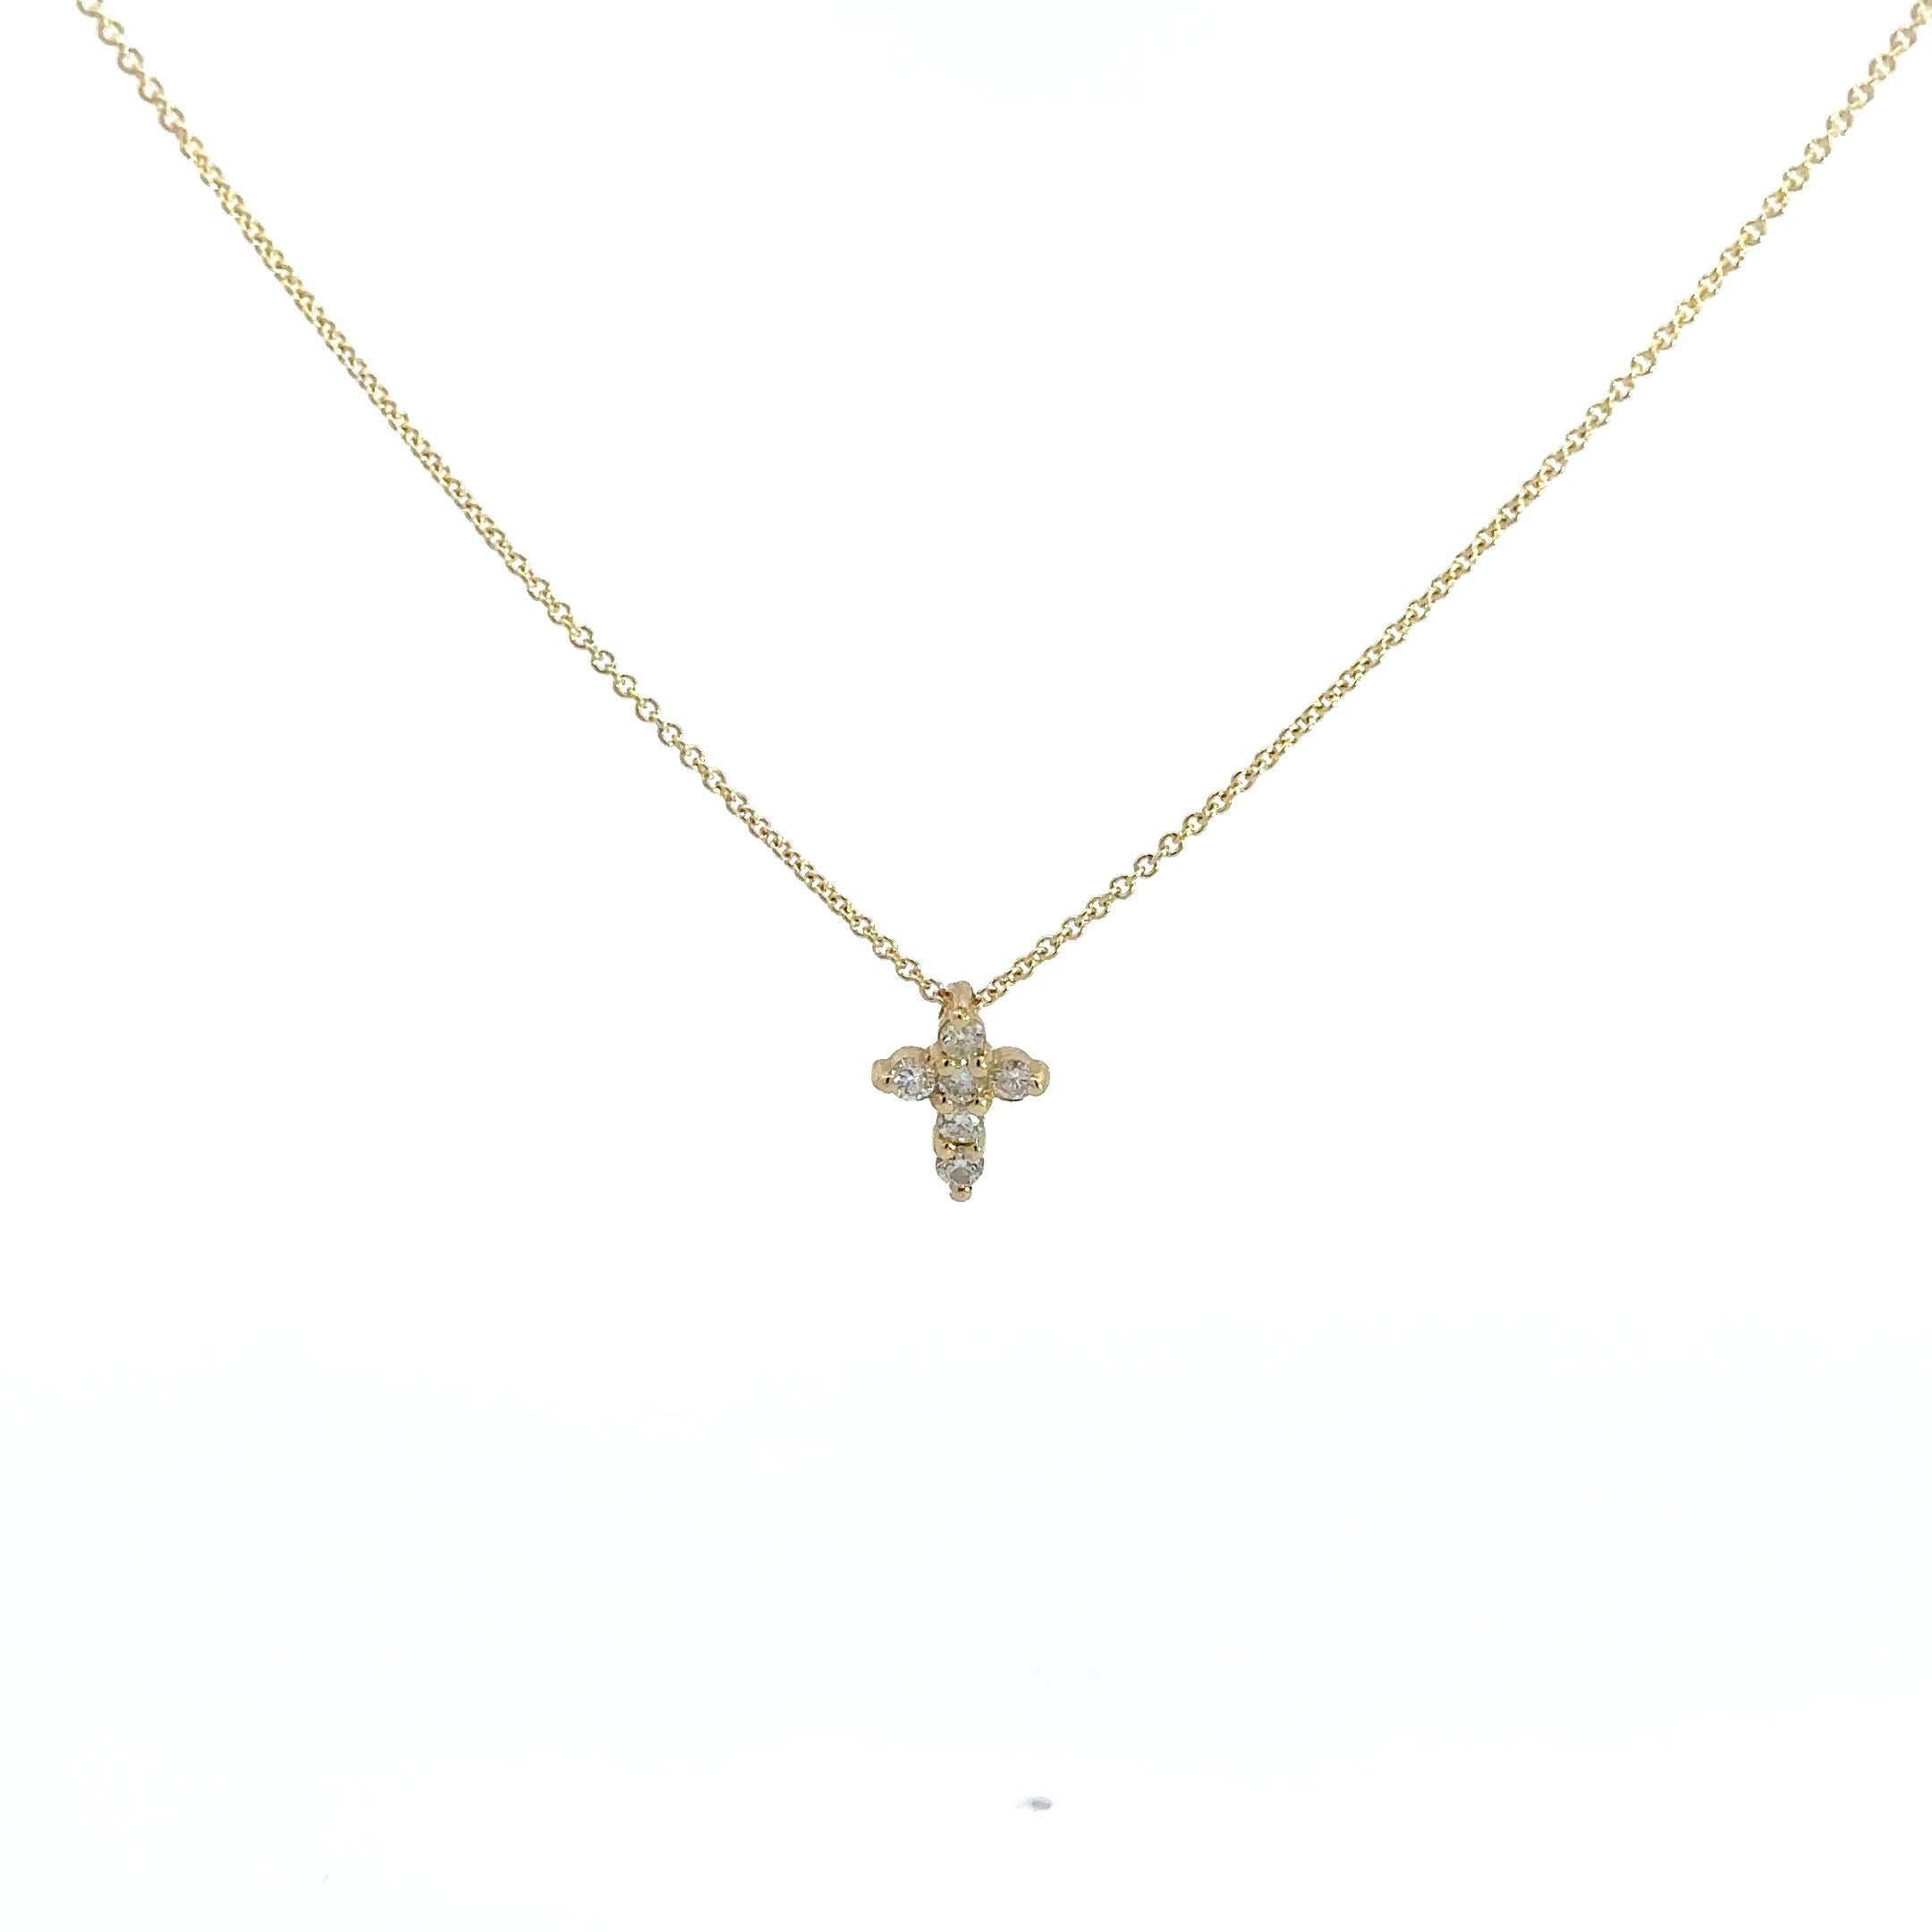 AD249 - 14kt gold Cross necklace